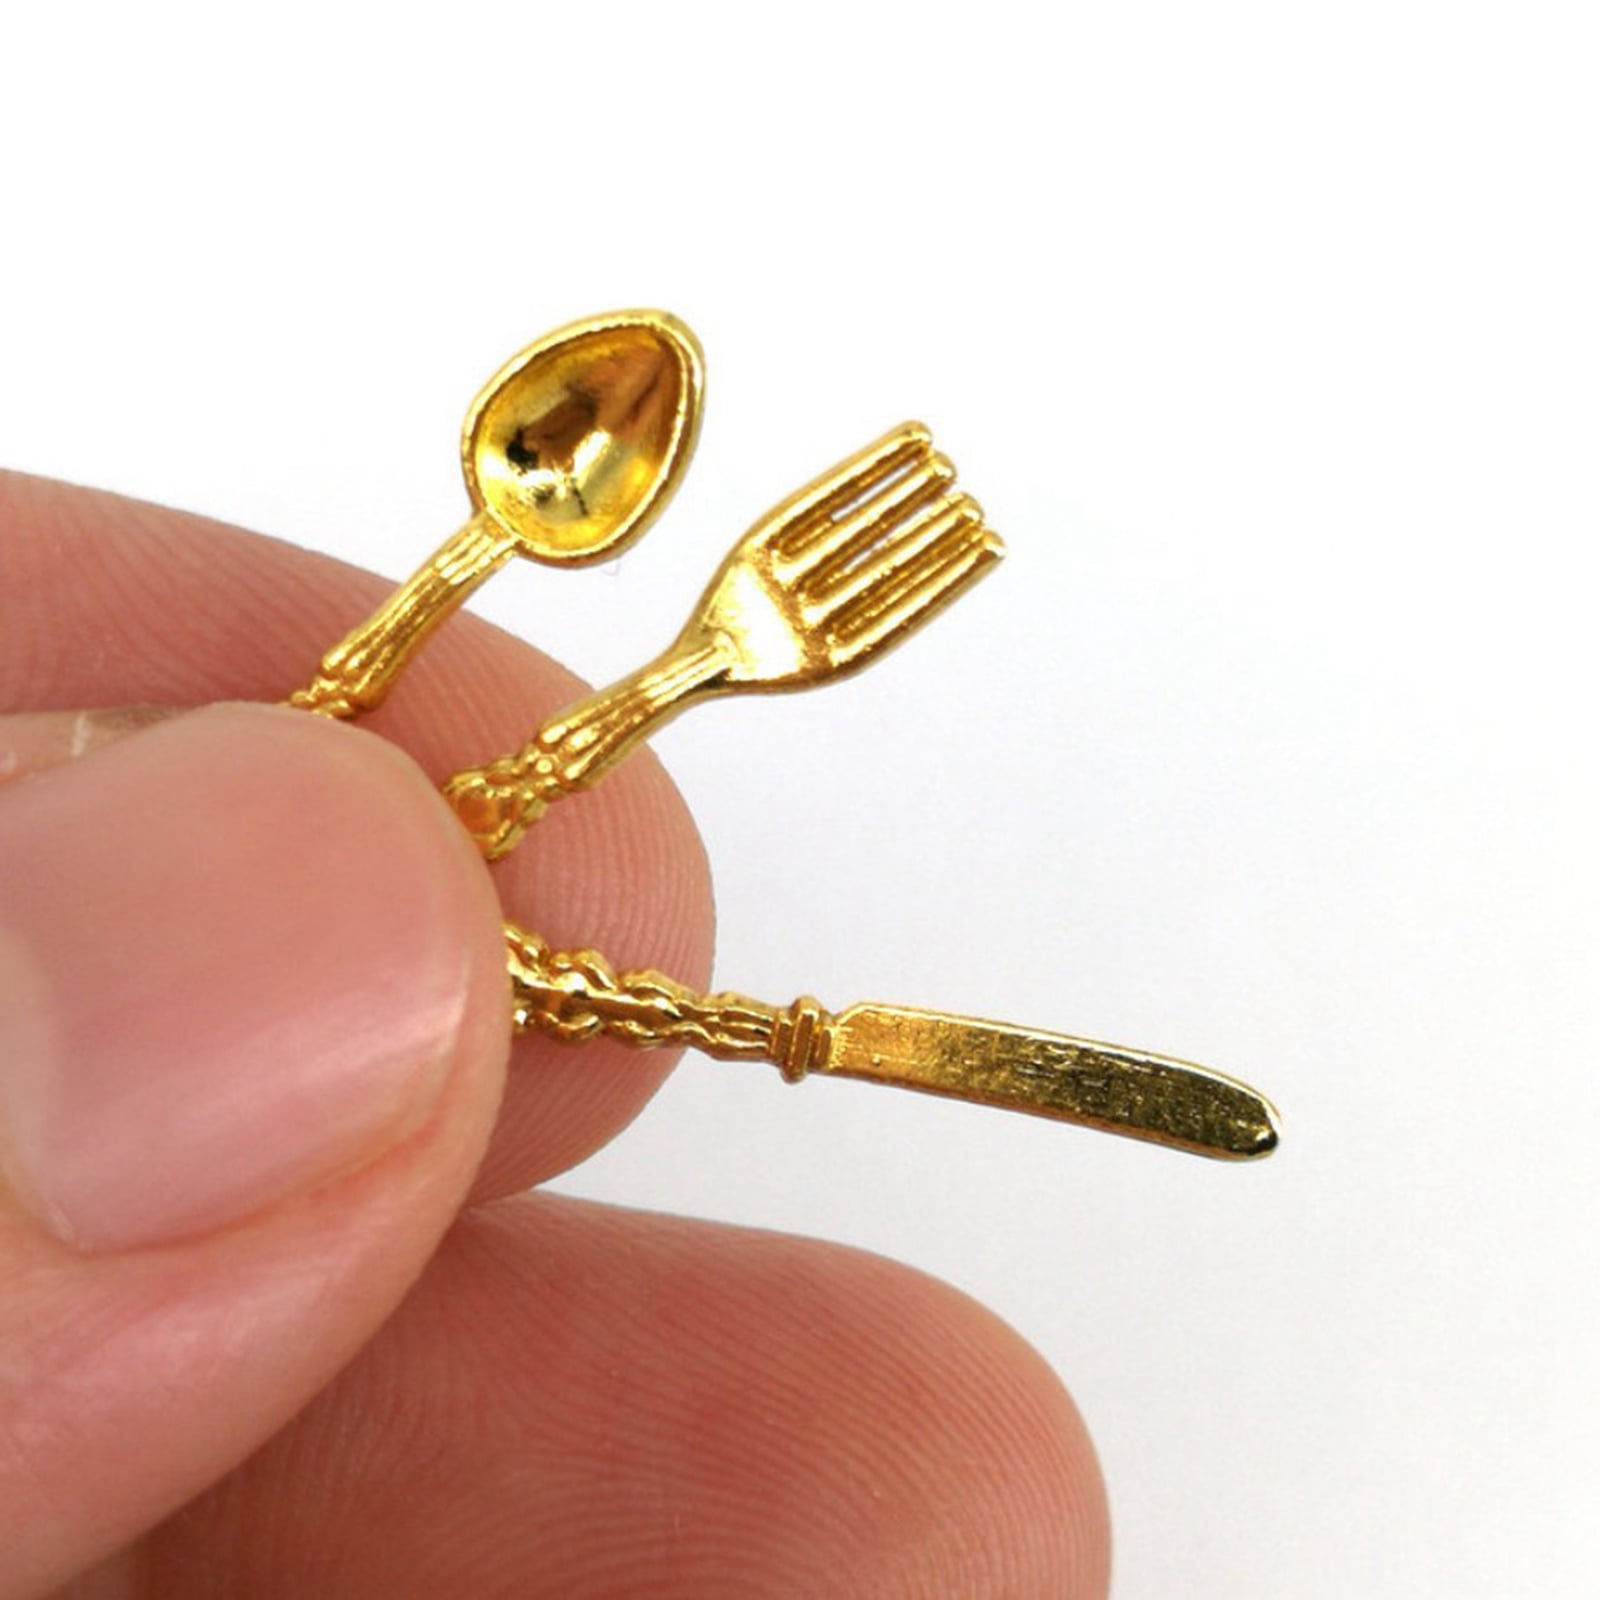 Details about   U002 Dollhouse 2pcs gold bear liked spoon tableware Miniature re-ment 1:12 